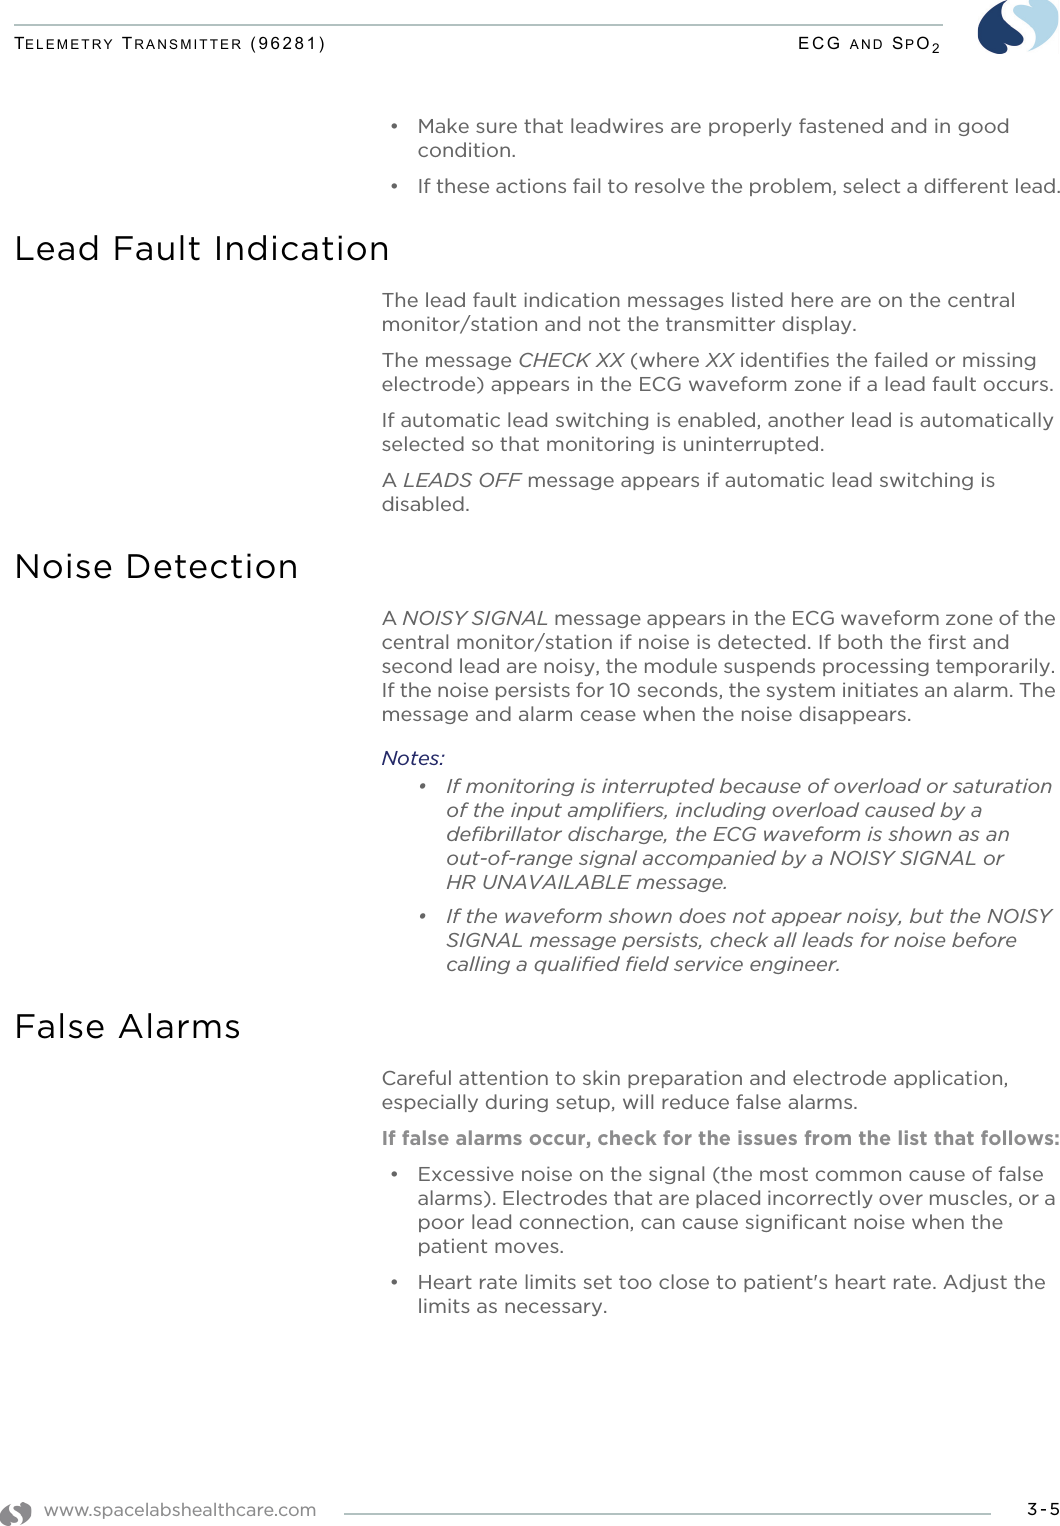 www.spacelabshealthcare.com 3-5TELEMETRY TRANSMITTER (96281) ECG AND SPO2• Make sure that leadwires are properly fastened and in good condition.• If these actions fail to resolve the problem, select a different lead.Lead Fault IndicationThe lead fault indication messages listed here are on the central monitor/station and not the transmitter display.The message CHECK XX (where XX identifies the failed or missing electrode) appears in the ECG waveform zone if a lead fault occurs.If automatic lead switching is enabled, another lead is automatically selected so that monitoring is uninterrupted.A LEADS OFF message appears if automatic lead switching is disabled.Noise DetectionA NOISY SIGNAL message appears in the ECG waveform zone of the central monitor/station if noise is detected. If both the first and second lead are noisy, the module suspends processing temporarily. If the noise persists for 10 seconds, the system initiates an alarm. The message and alarm cease when the noise disappears.Notes:• If monitoring is interrupted because of overload or saturation of the input amplifiers, including overload caused by a defibrillator discharge, the ECG waveform is shown as an out-of-range signal accompanied by a NOISY SIGNAL or HR UNAVAILABLE message. • If the waveform shown does not appear noisy, but the NOISY SIGNAL message persists, check all leads for noise before calling a qualified field service engineer.False AlarmsCareful attention to skin preparation and electrode application, especially during setup, will reduce false alarms.If false alarms occur, check for the issues from the list that follows:• Excessive noise on the signal (the most common cause of false alarms). Electrodes that are placed incorrectly over muscles, or a poor lead connection, can cause significant noise when the patient moves.• Heart rate limits set too close to patient&apos;s heart rate. Adjust the limits as necessary.